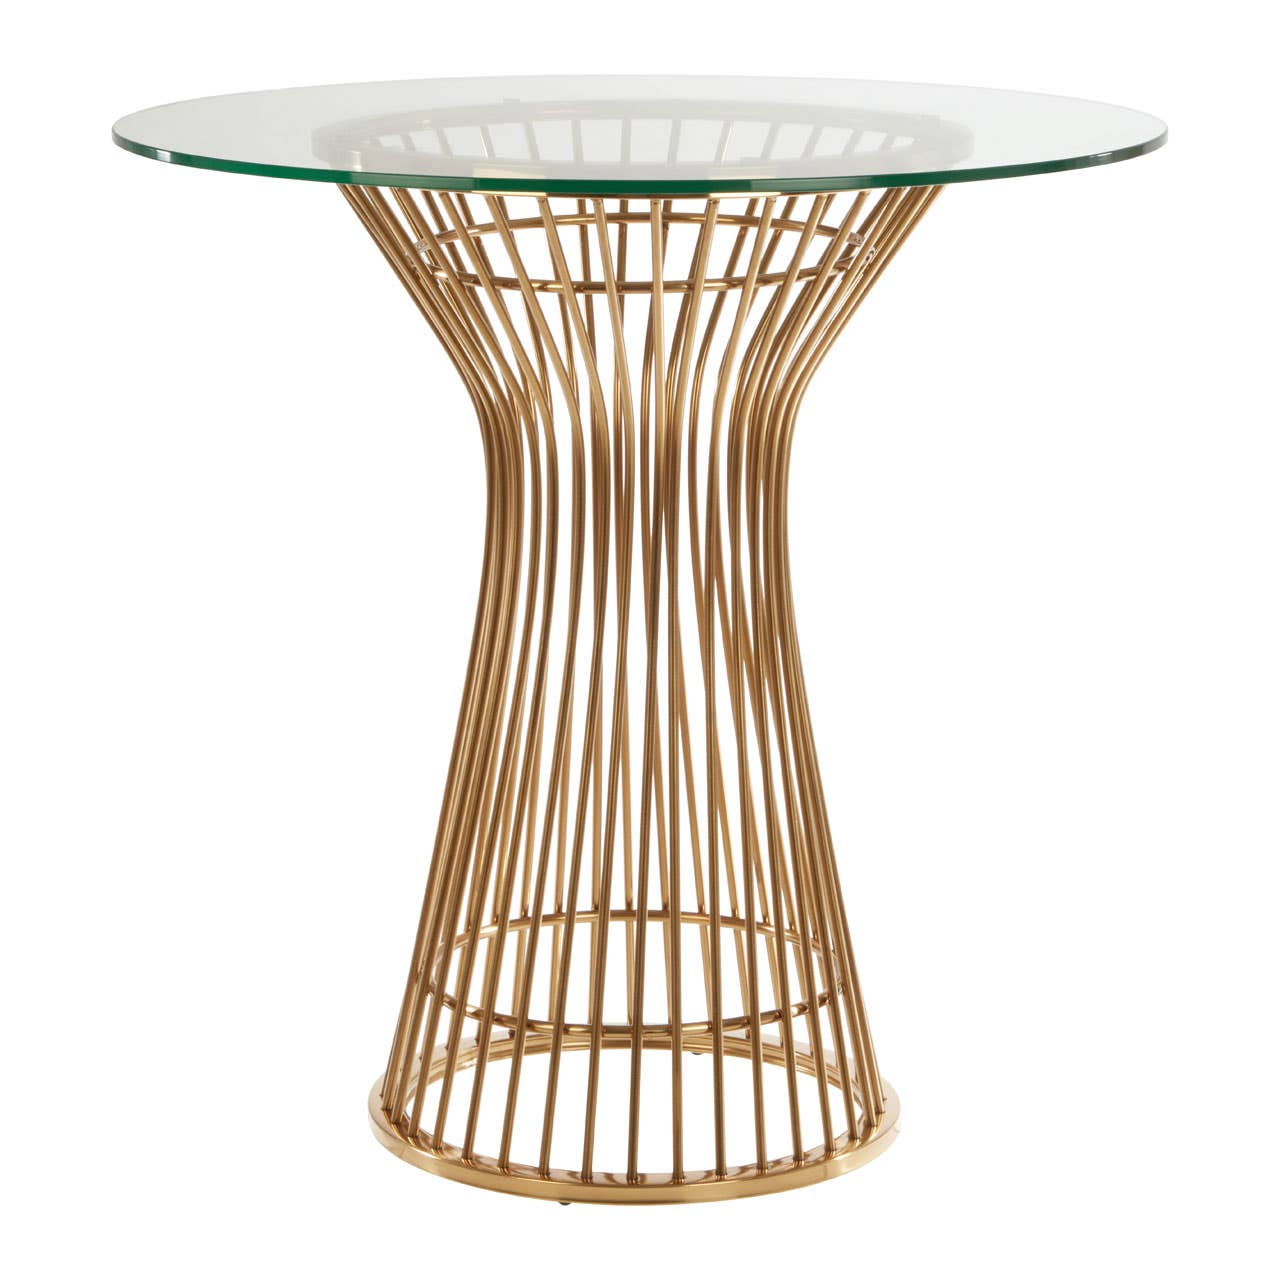 VOGUE ROUND DINING TABLE